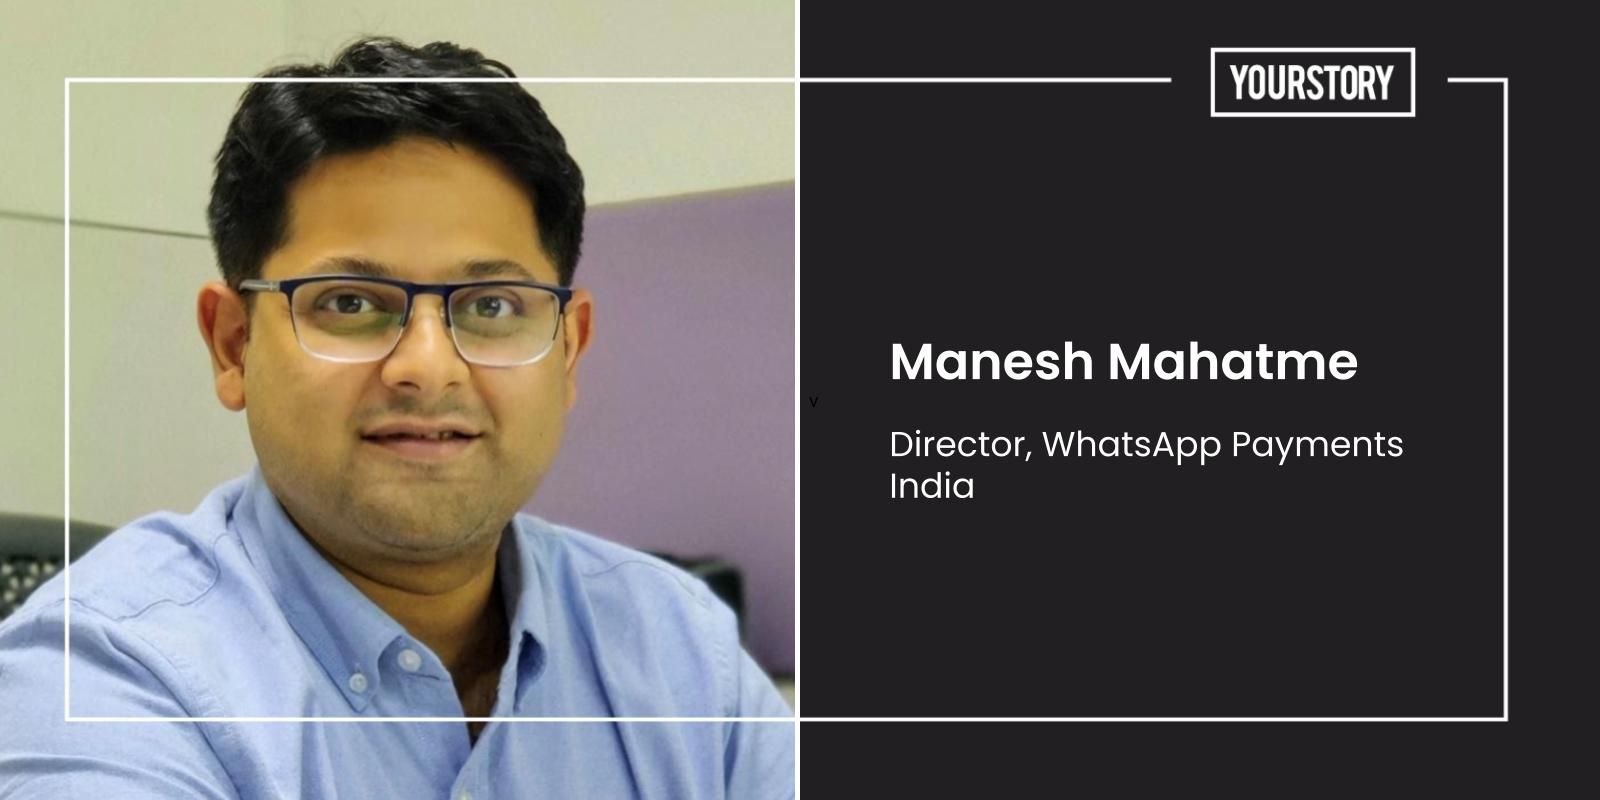 [YS Exclusive] Payments on WhatsApp can help promote UPI ecosystem: Manesh Mahatme, Director, WhatsApp Payments India 
